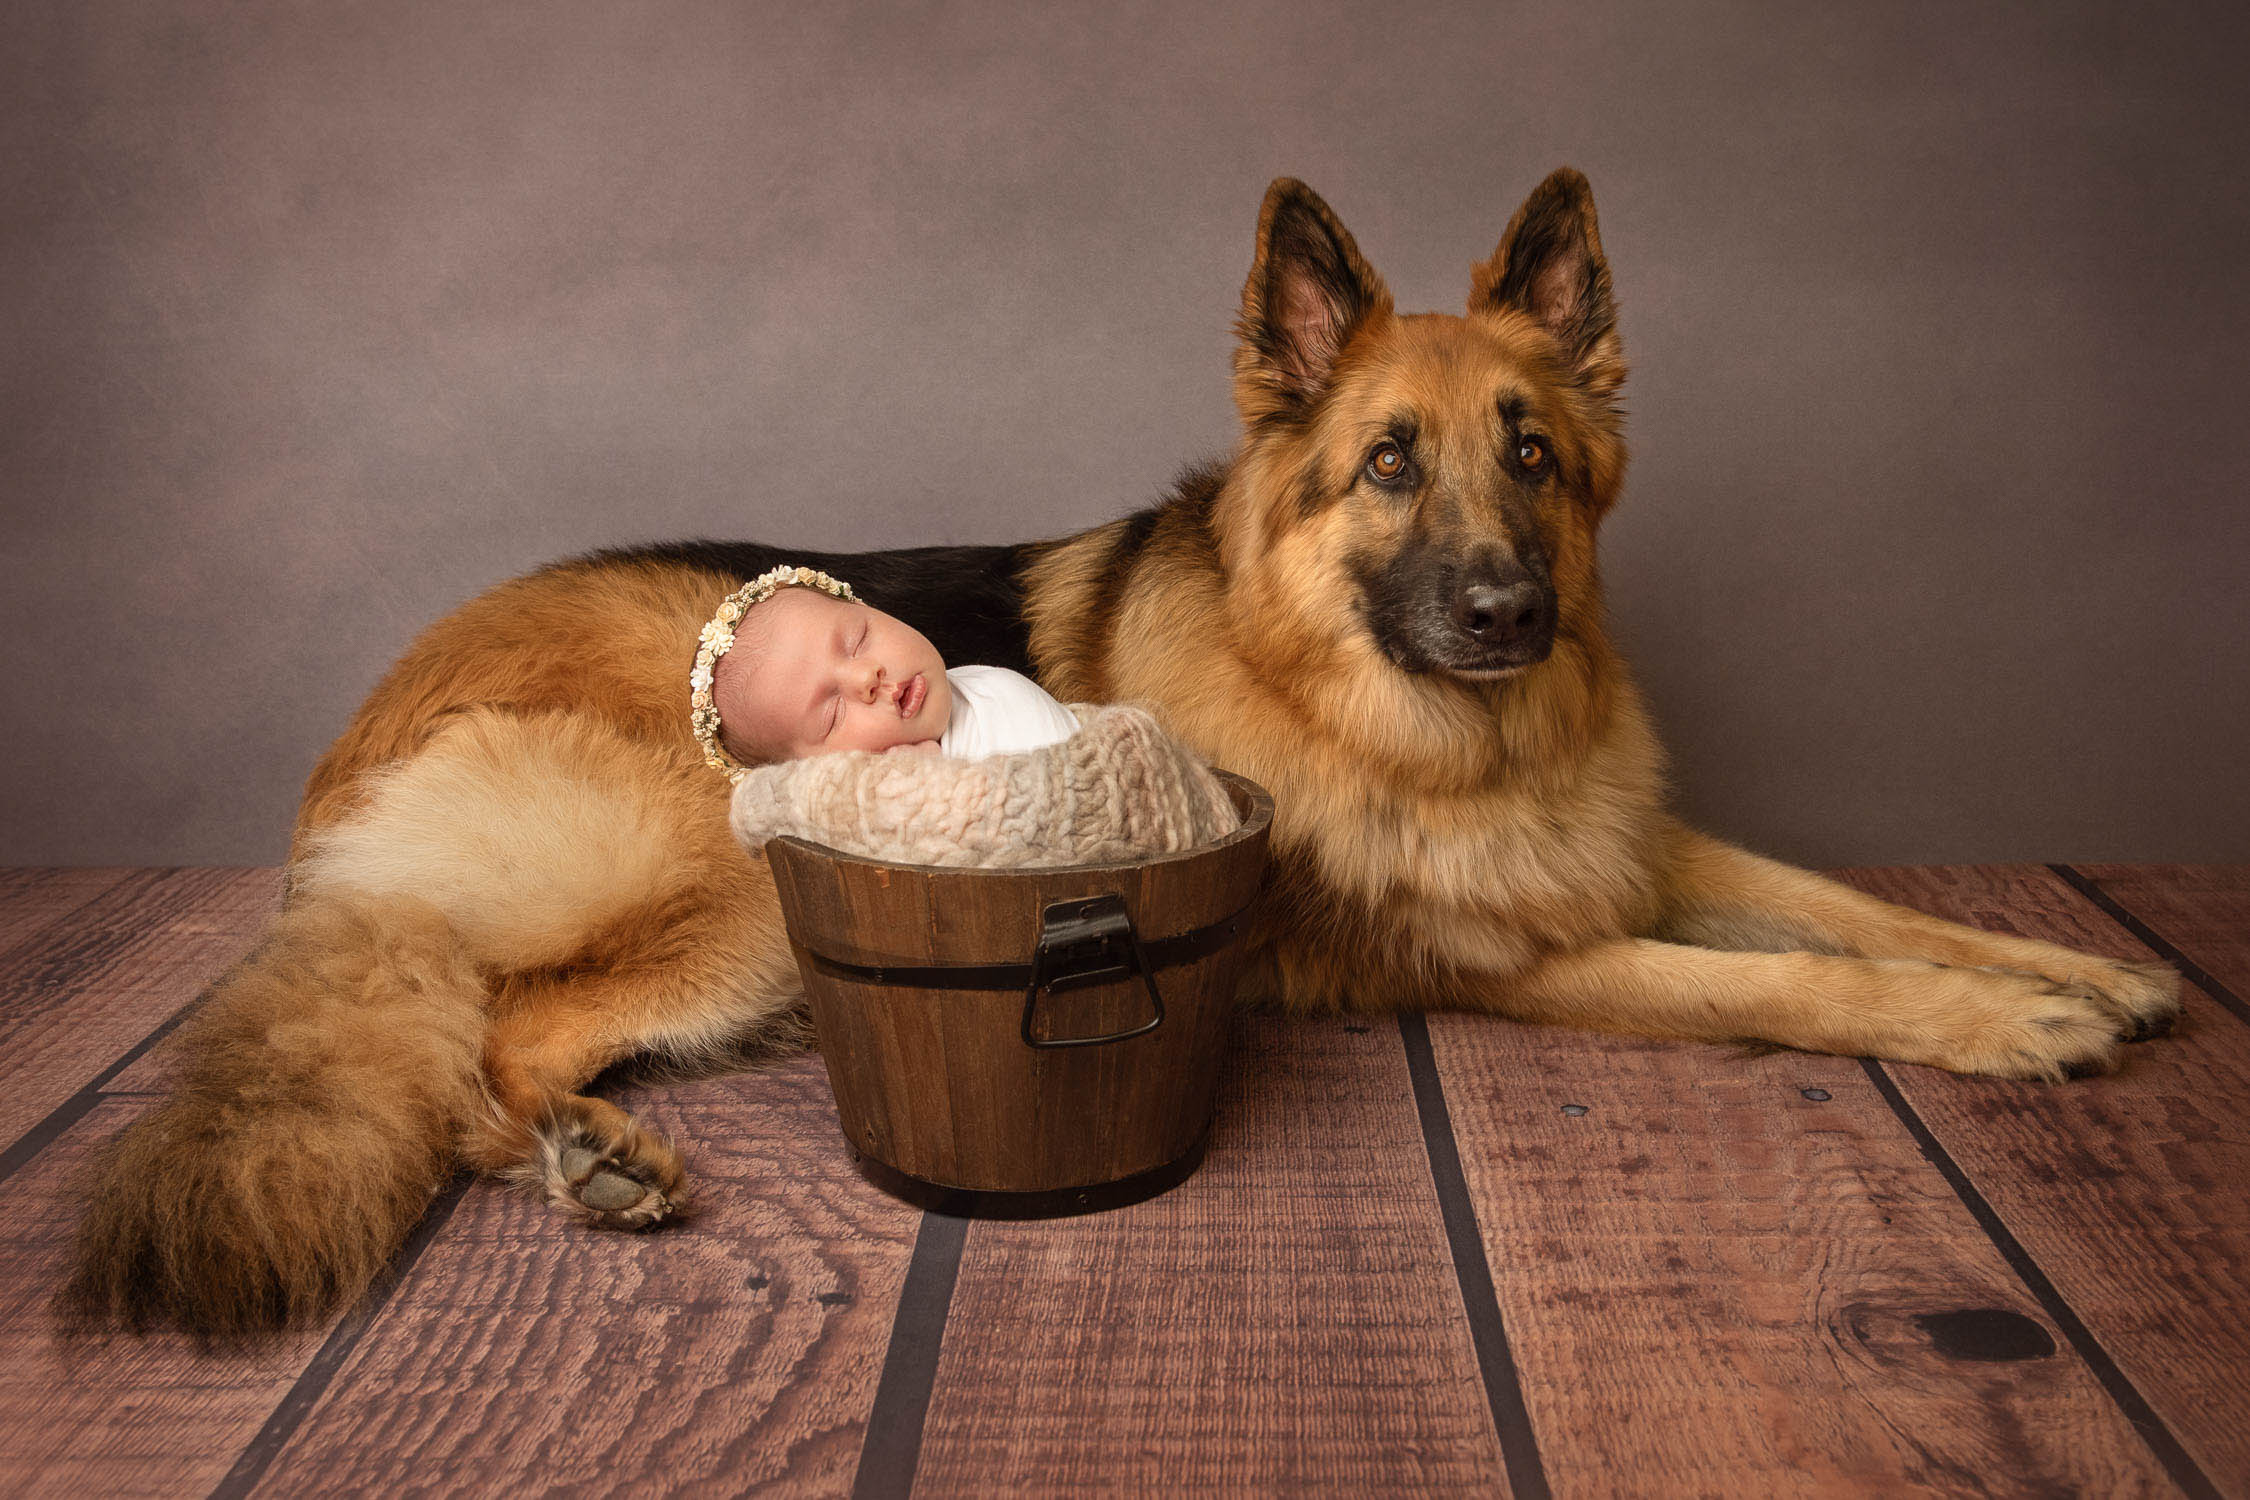 dog and baby photograph by pet photographer siobhan kelly photography